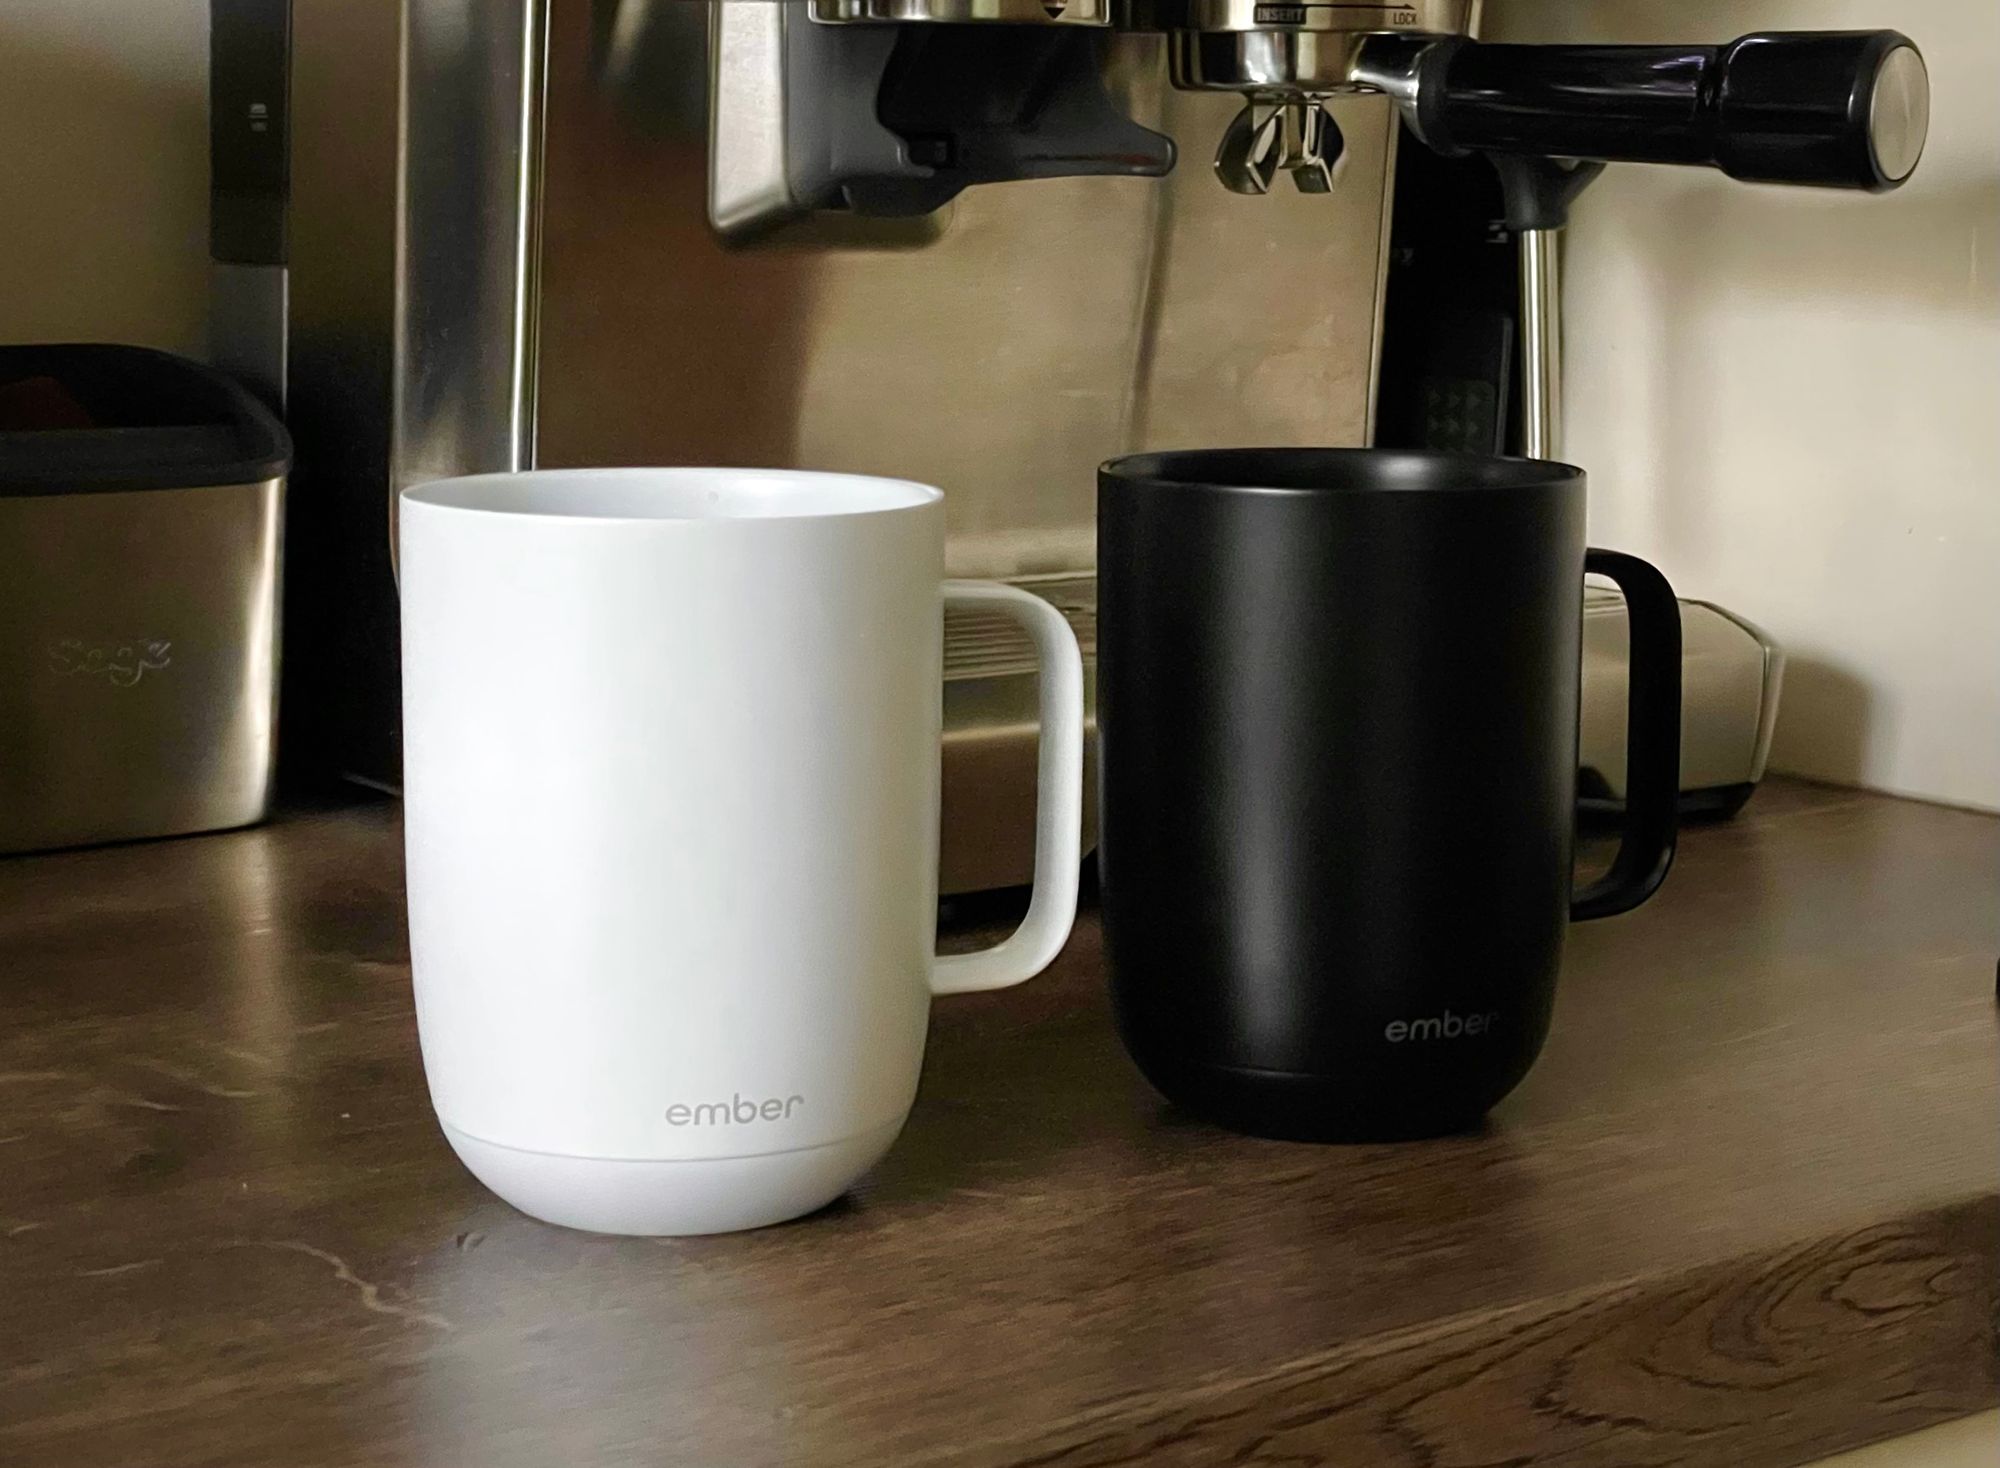 Two Ember mugs, one black and one white, on a brown wooden kitchen counter in front of an espresso machine